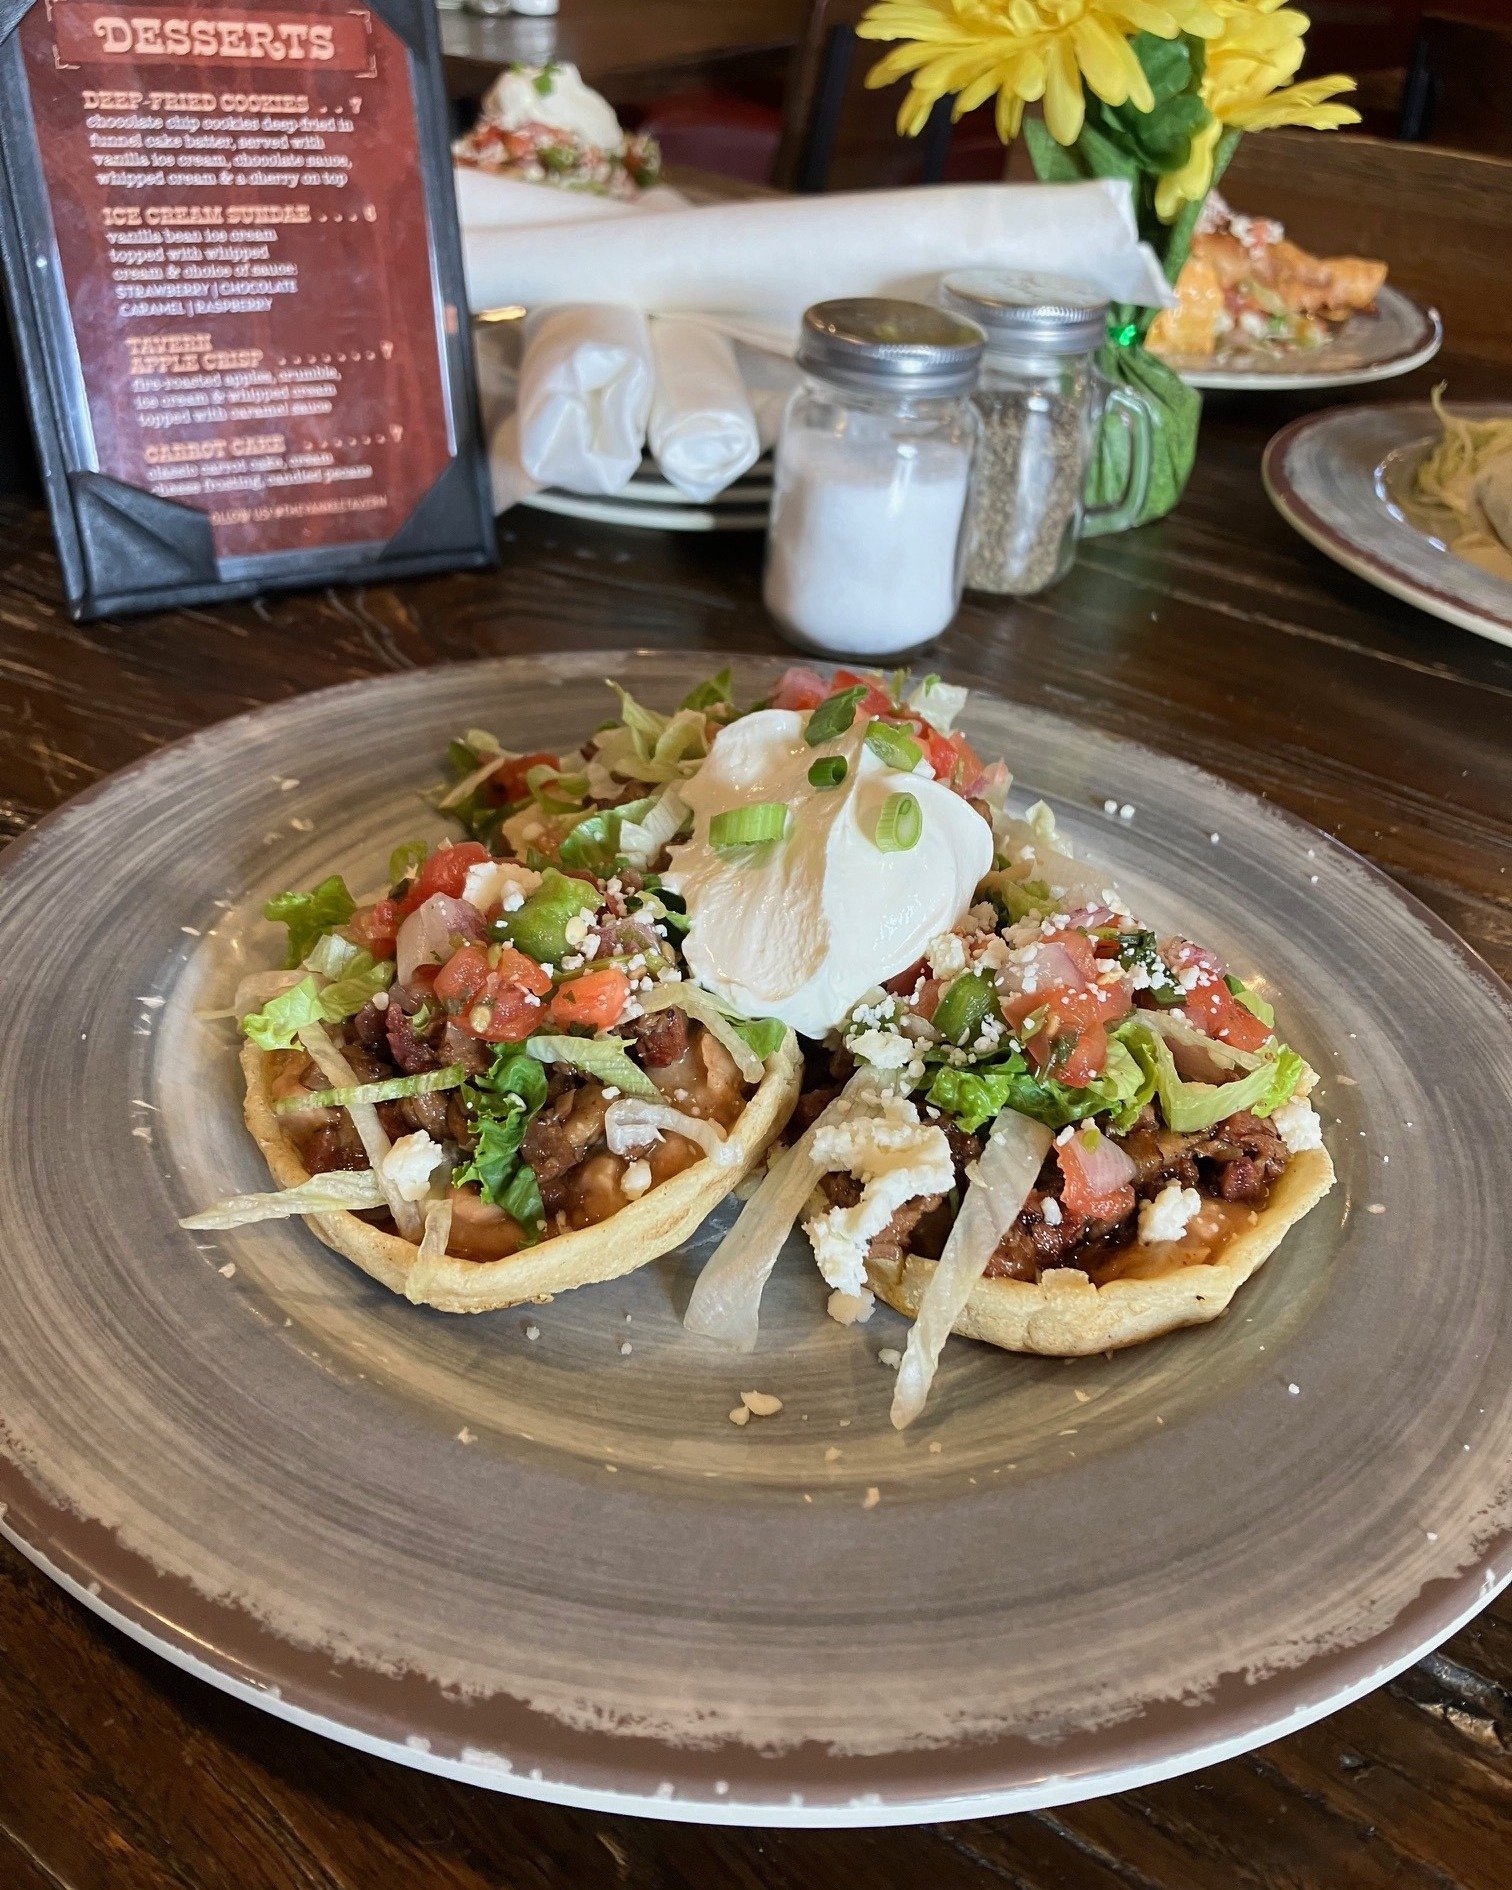 Smoked Brisket Sopes are on the menu for Mexican Tuesdays in May 🇲🇽 Three thick mini corn tortillas are topped with house-made refried beans, house-smoked brisket, pico de gallo, lettuce &amp; queso fresco. Try thrm on Tuesdays all month long for $